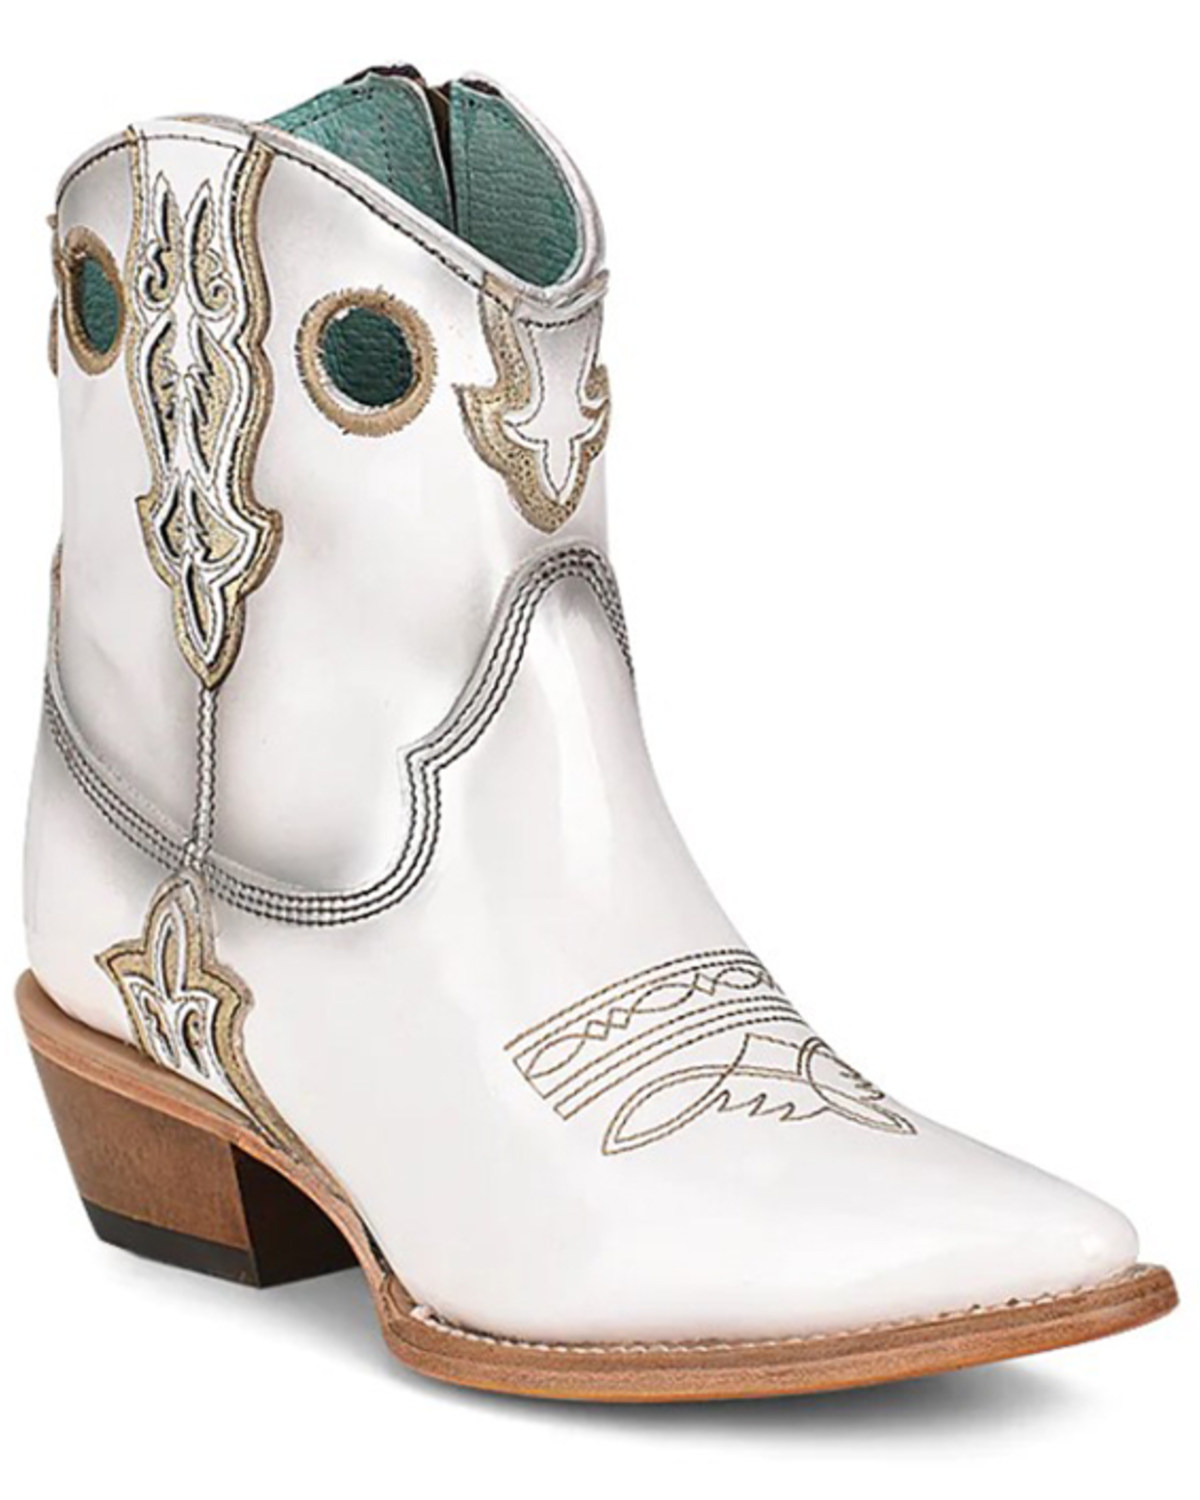 Corral Women's Patent Leather Inlay & Embroidery Western Booties - Pointed Toe